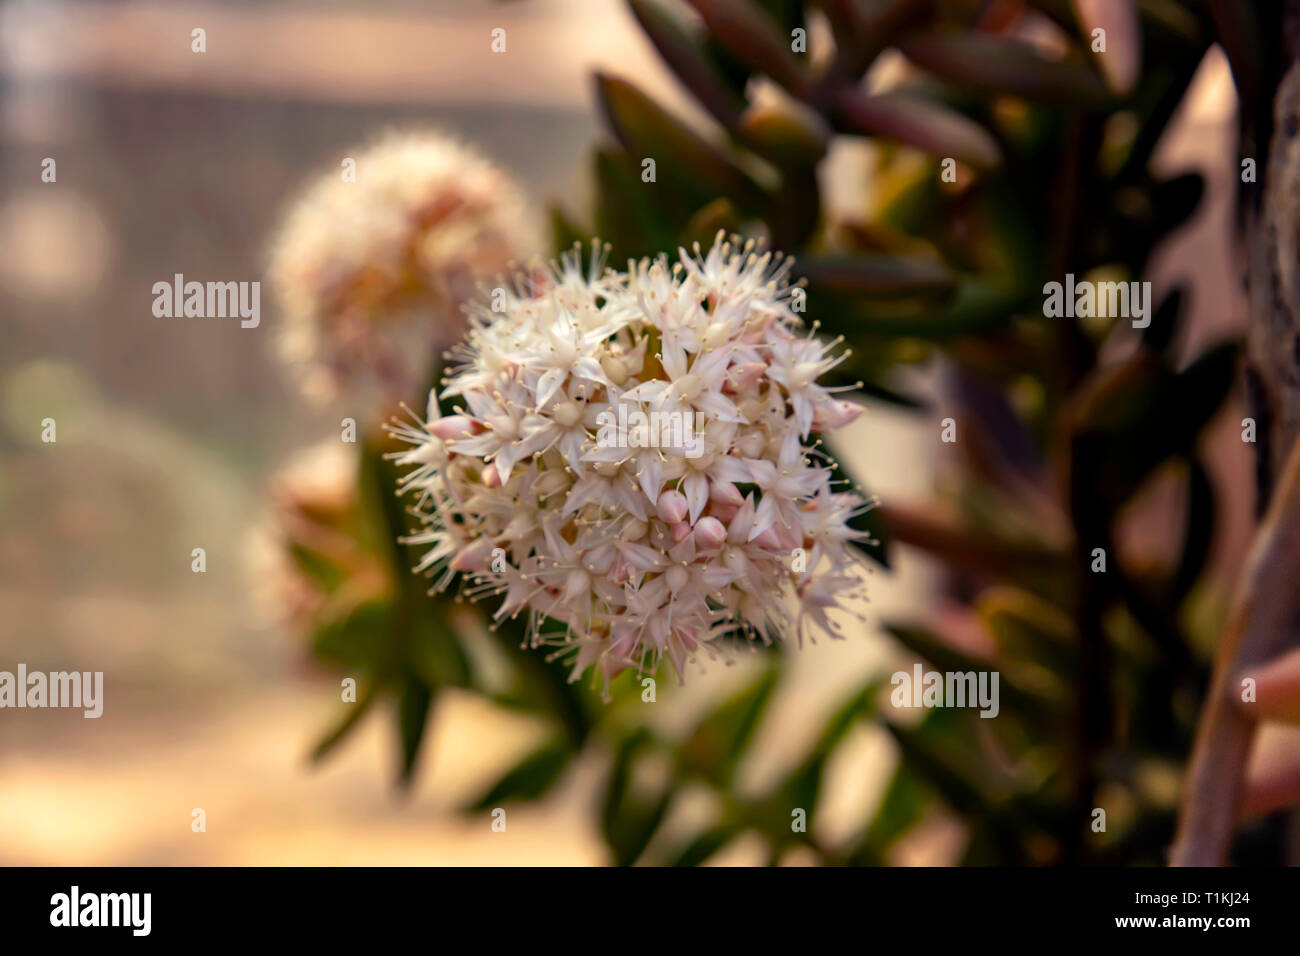 Delicate succulent flowers against the background of tree bark close-up. Stock Photo